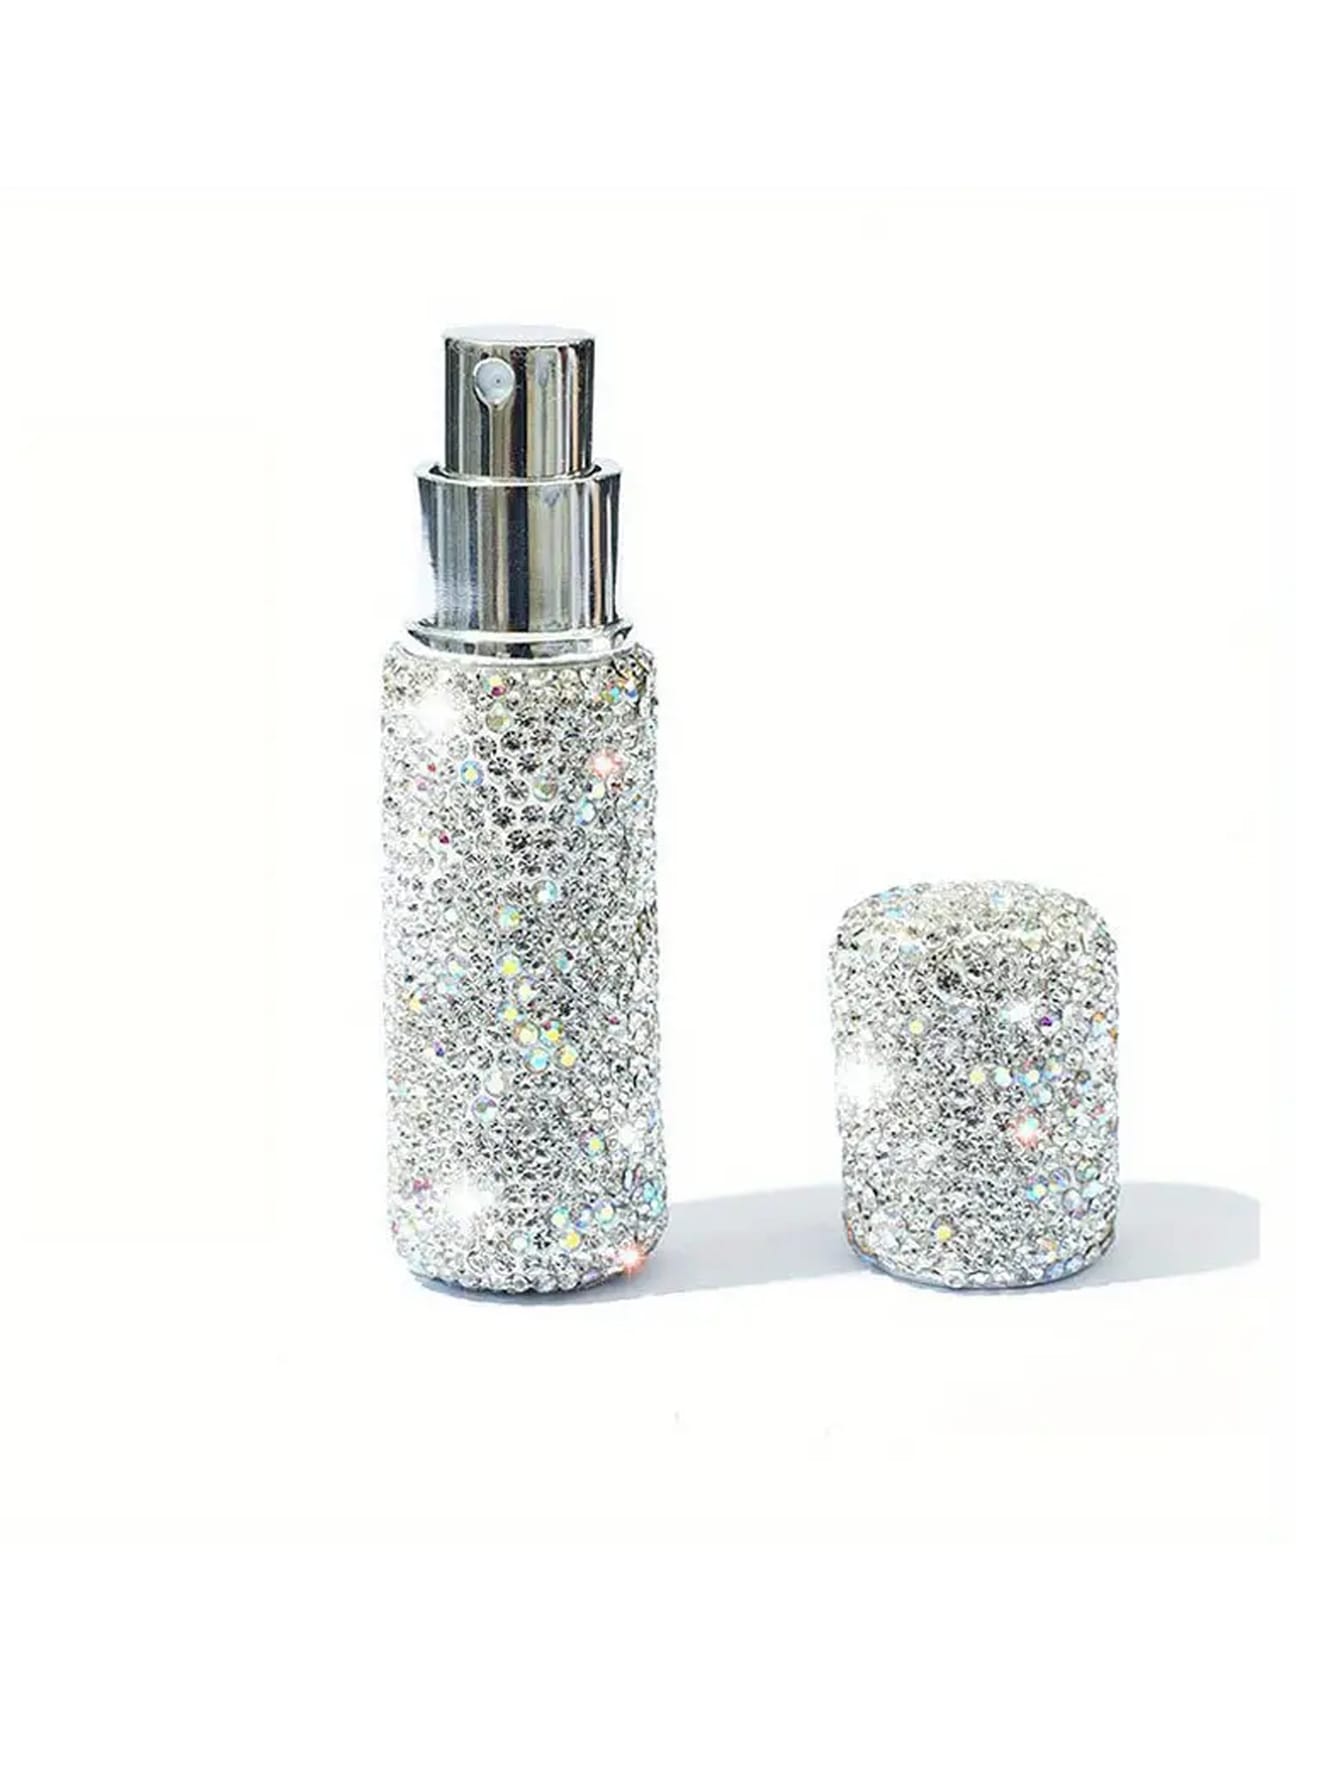 10ml Portable Vacuum Press Bottle For Perfume Refill, Spray Bottle With Fine Mist Sprayer, Diamond Decorated, Ideal For Travel, Makeup And Skincare-Multicolor-4